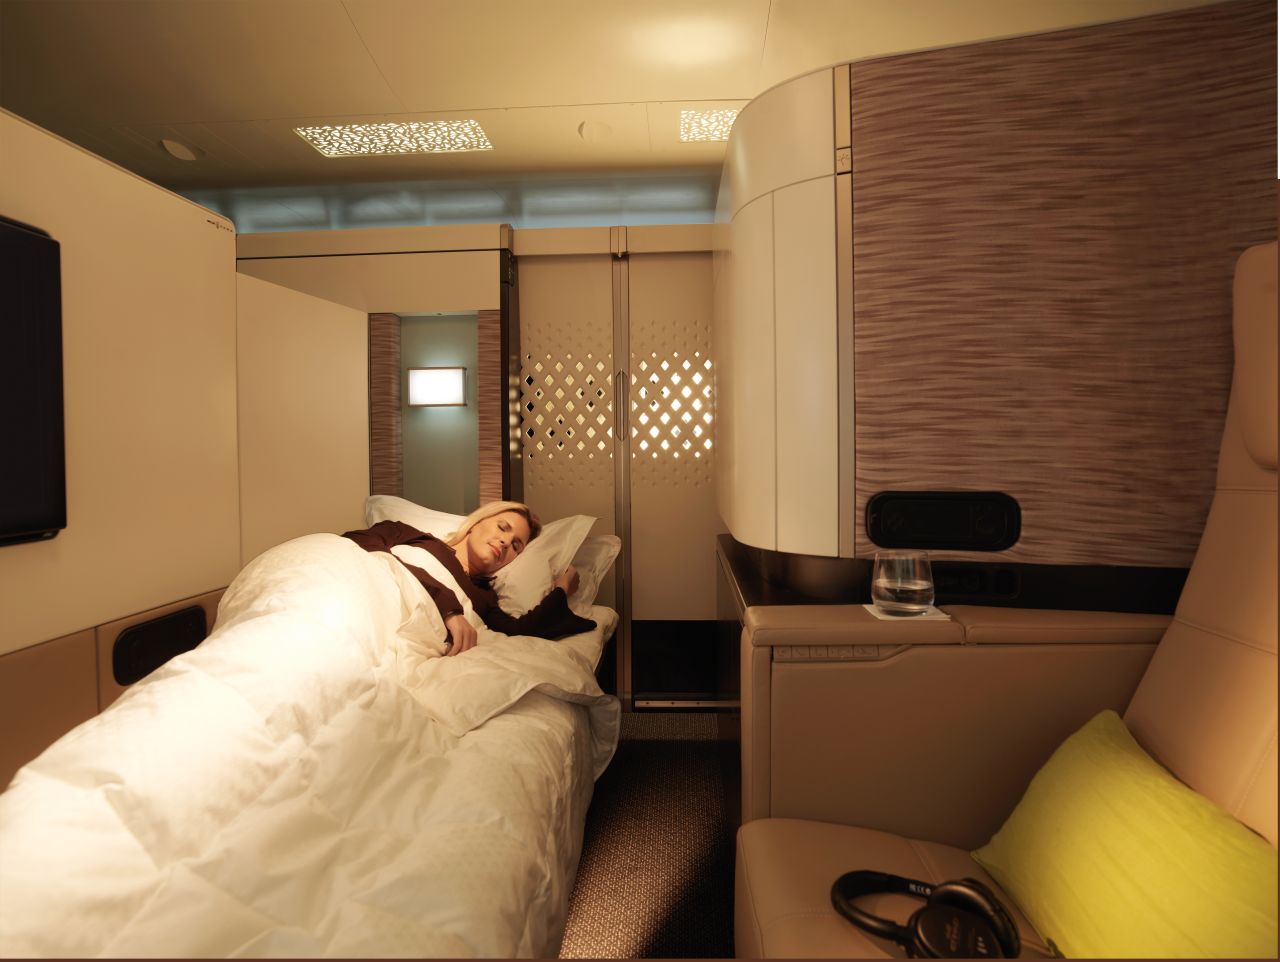 Etihad Apartments are the airline's less luxurious first class offering. We'll take one.